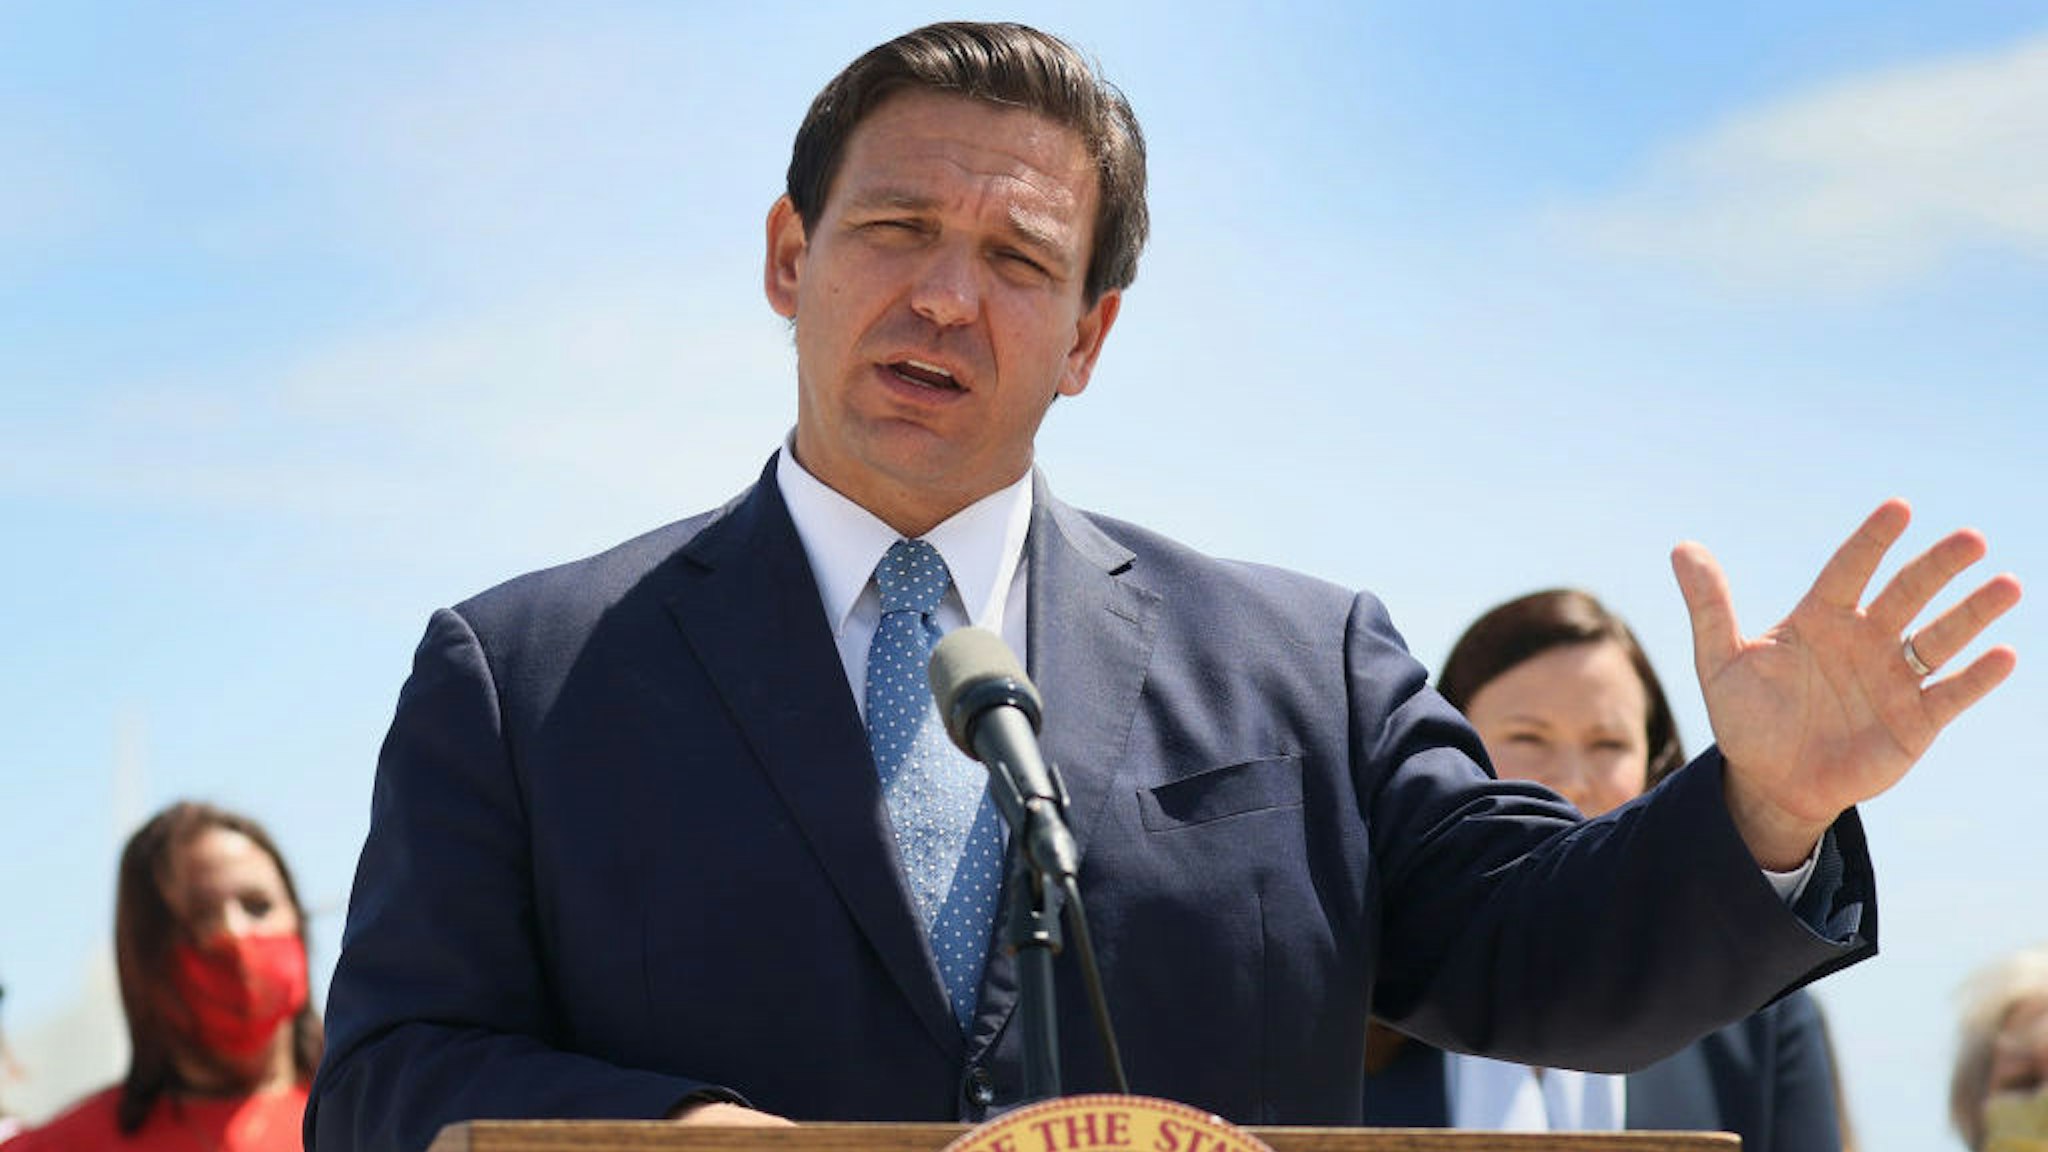 MIAMI, FLORIDA - APRIL 08: Florida Gov. Ron DeSantis speaks to the media about the cruise industry during a press conference at PortMiami on April 08, 2021 in Miami, Florida. The Governor announced that the state is suing the federal government to allow cruises to resume in Florida. (Photo by Joe Raedle/Getty Images)